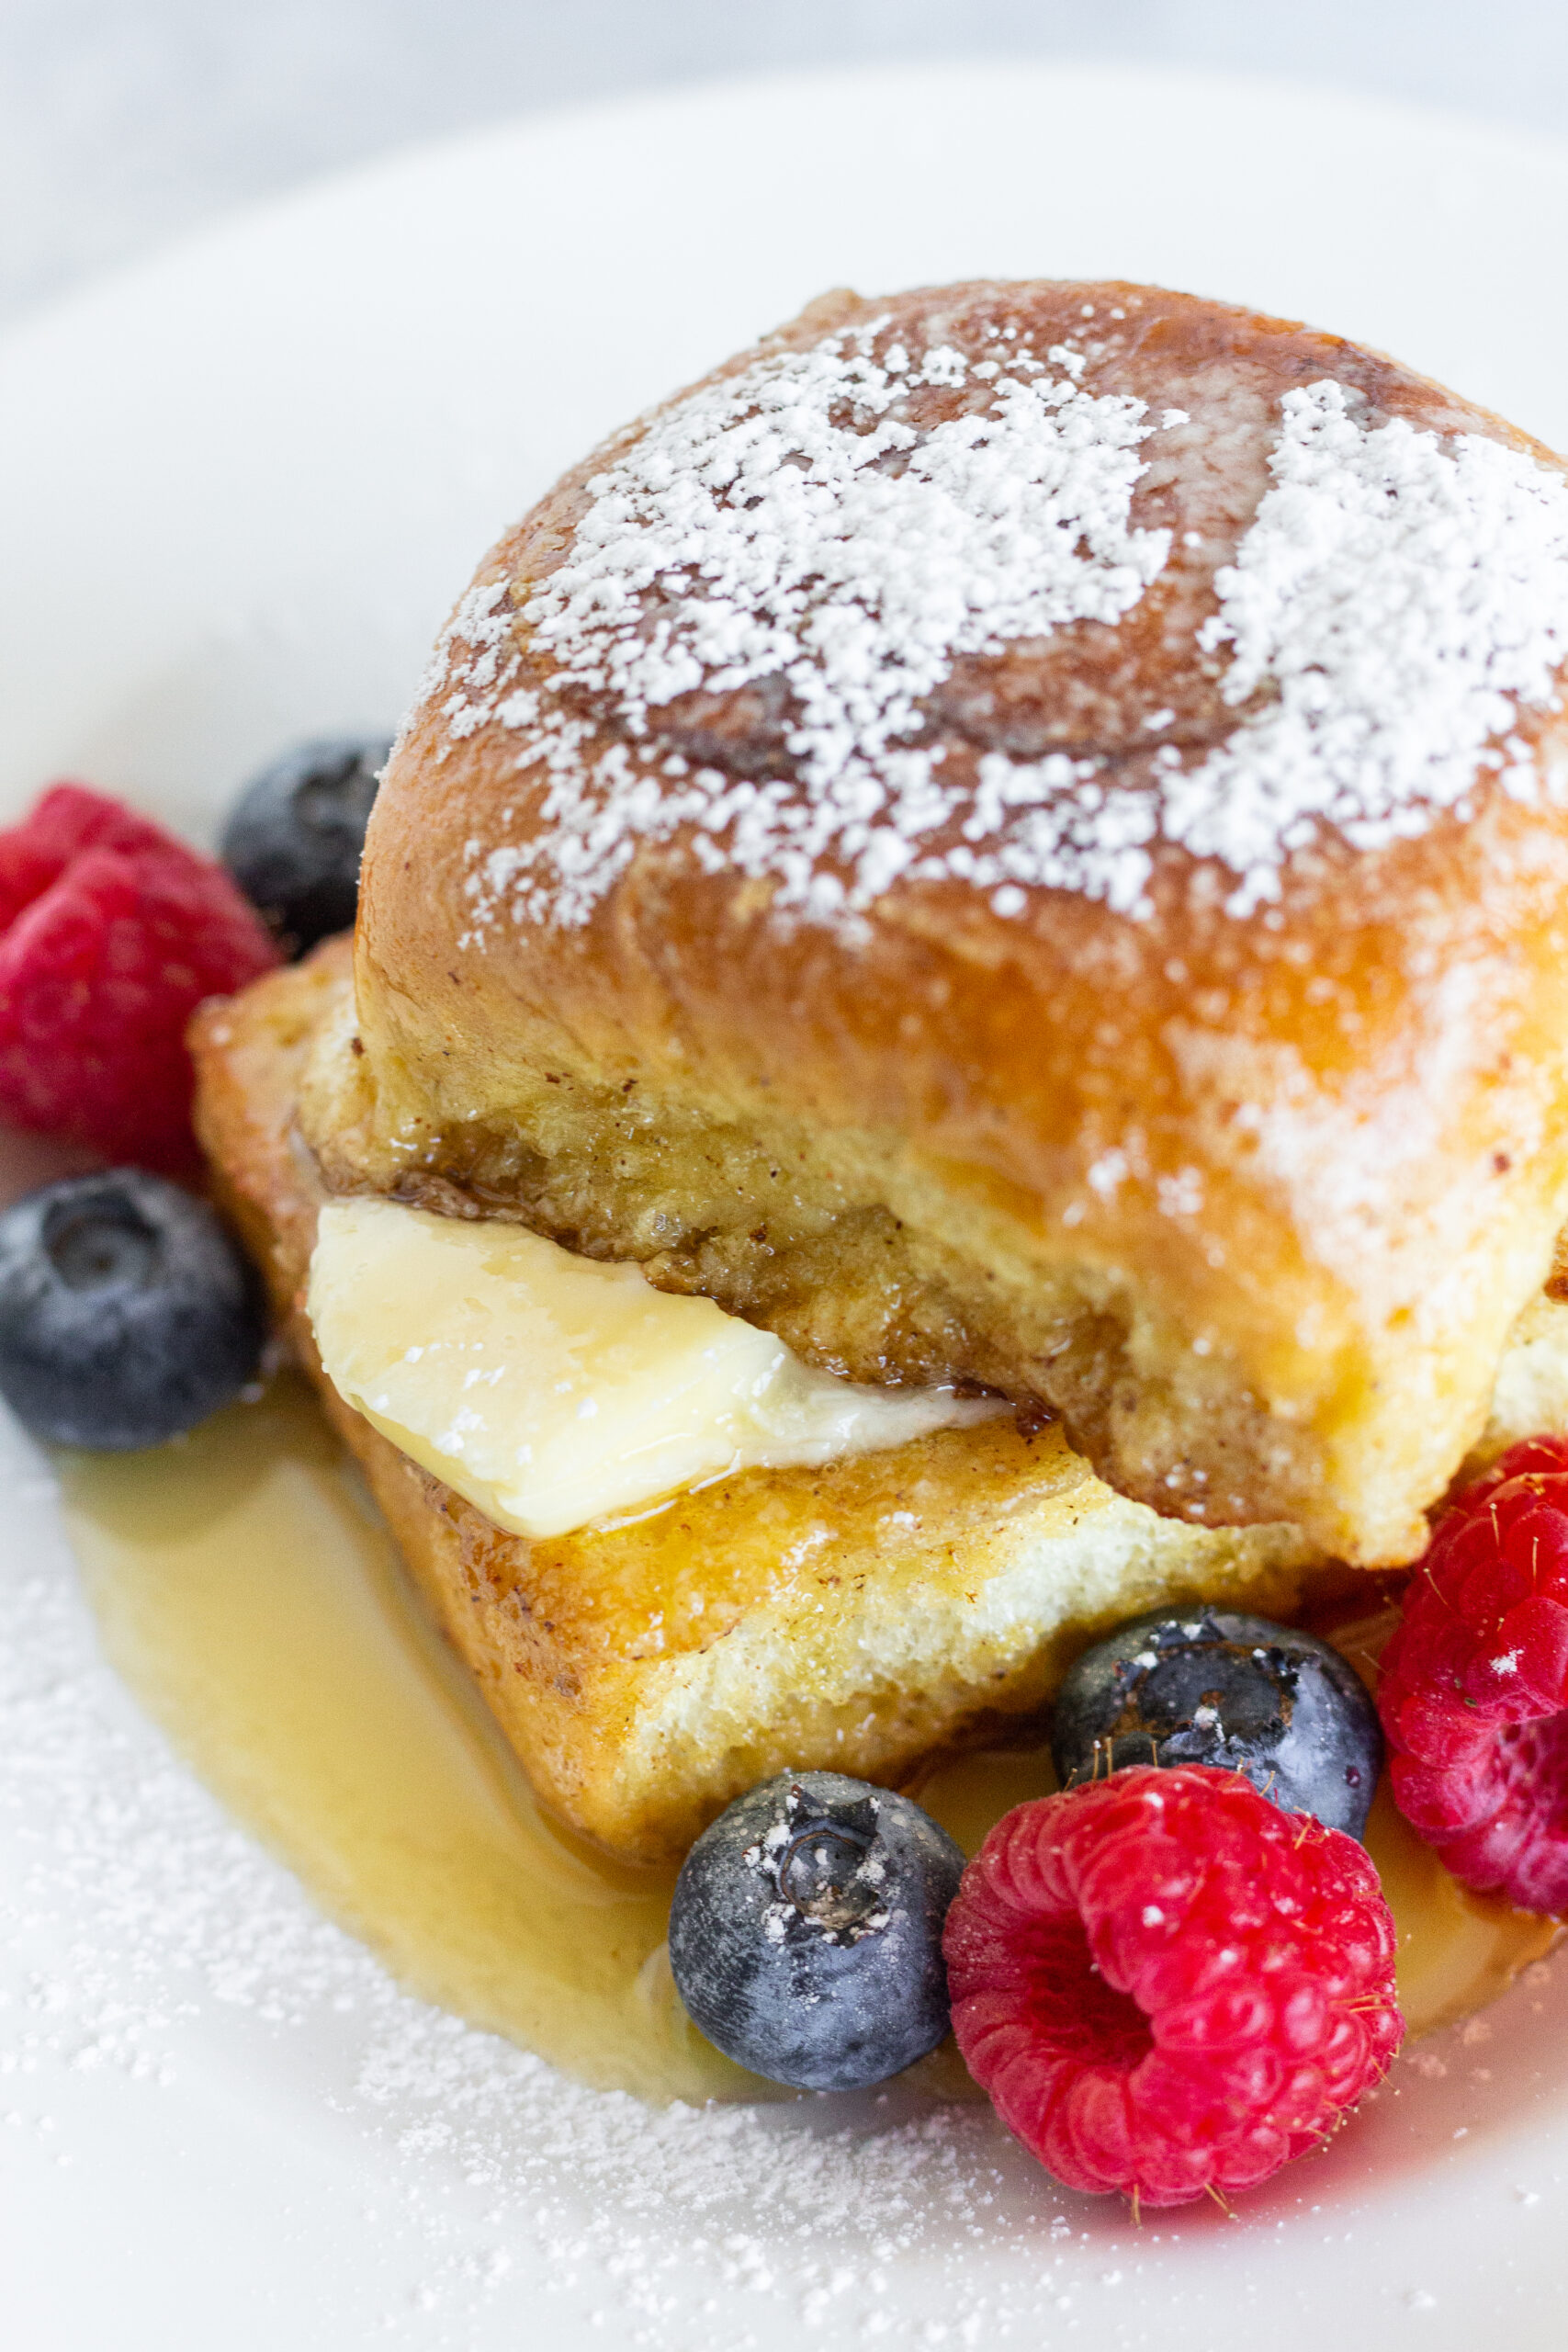 Hawaiian Roll French Toast, by Top US food blog Practically Homemade